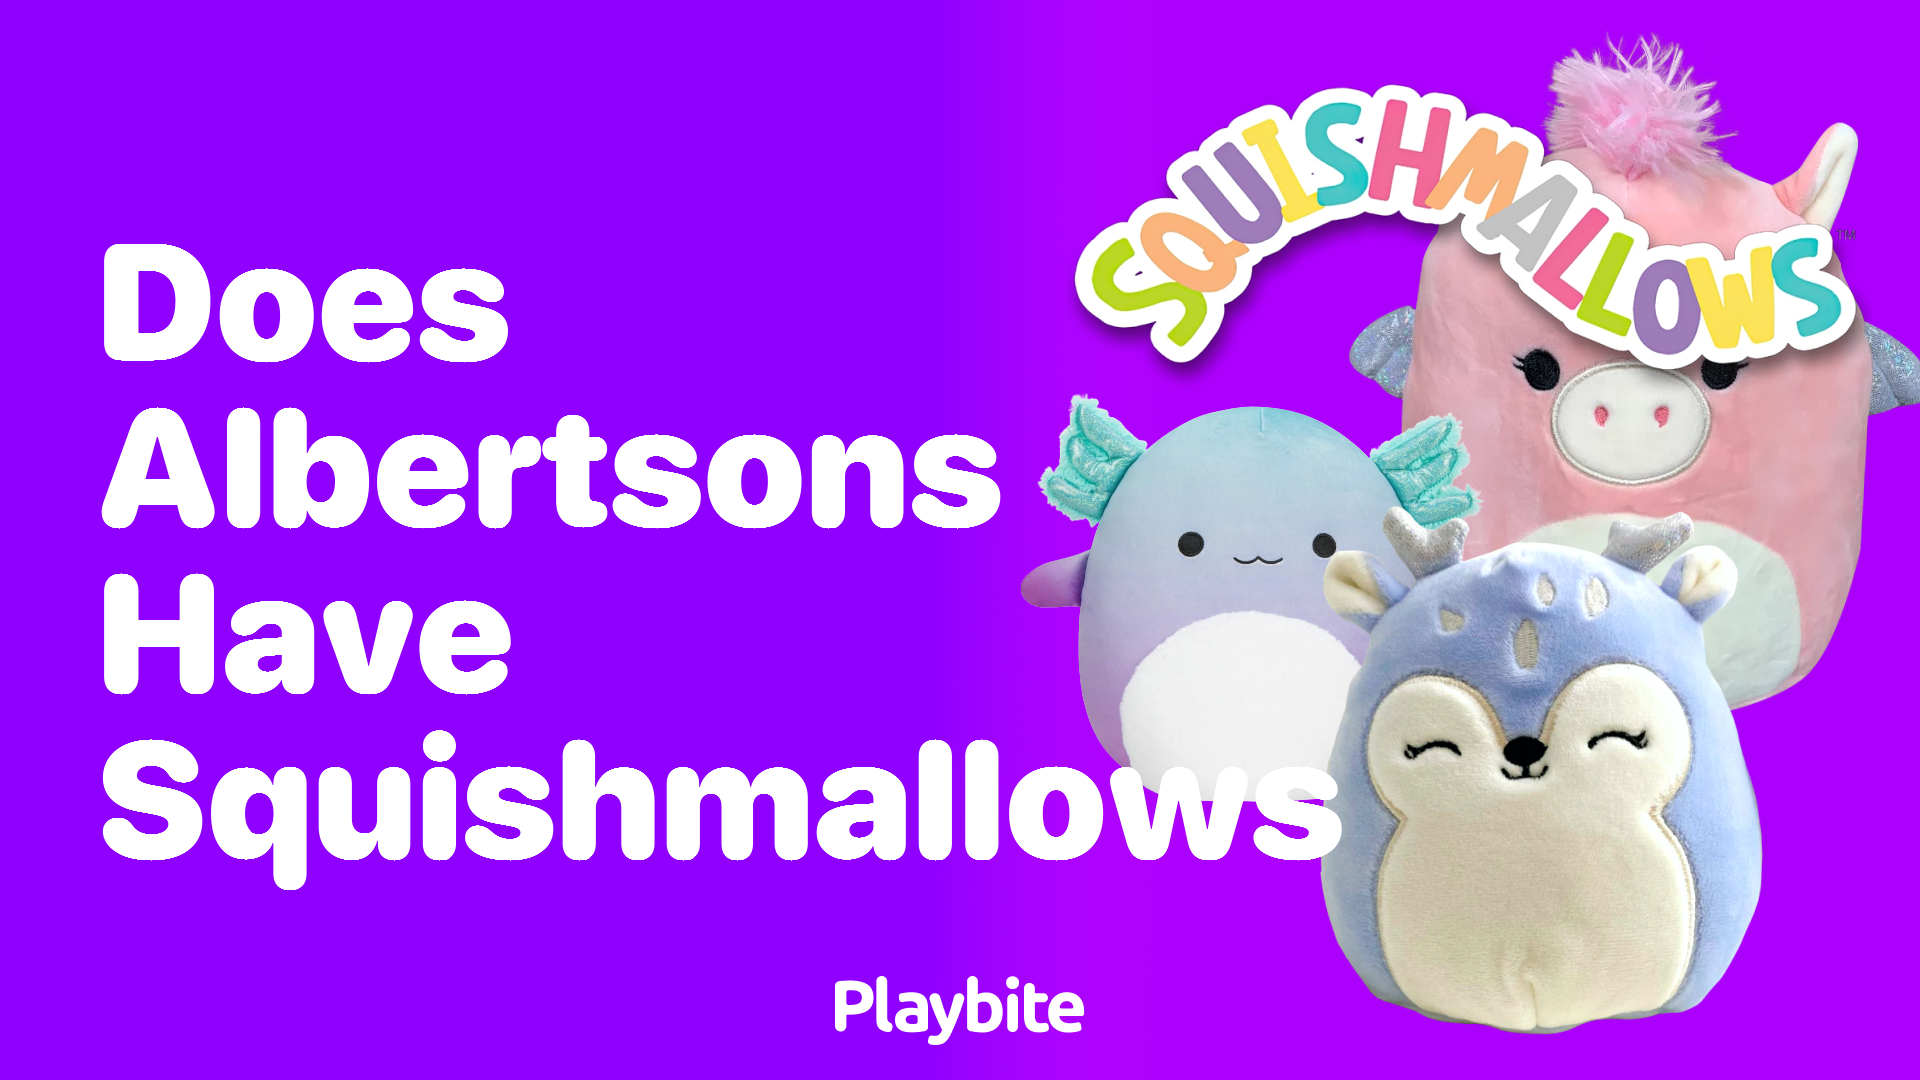 Does Albertsons Have Squishmallows? Find Out Here!